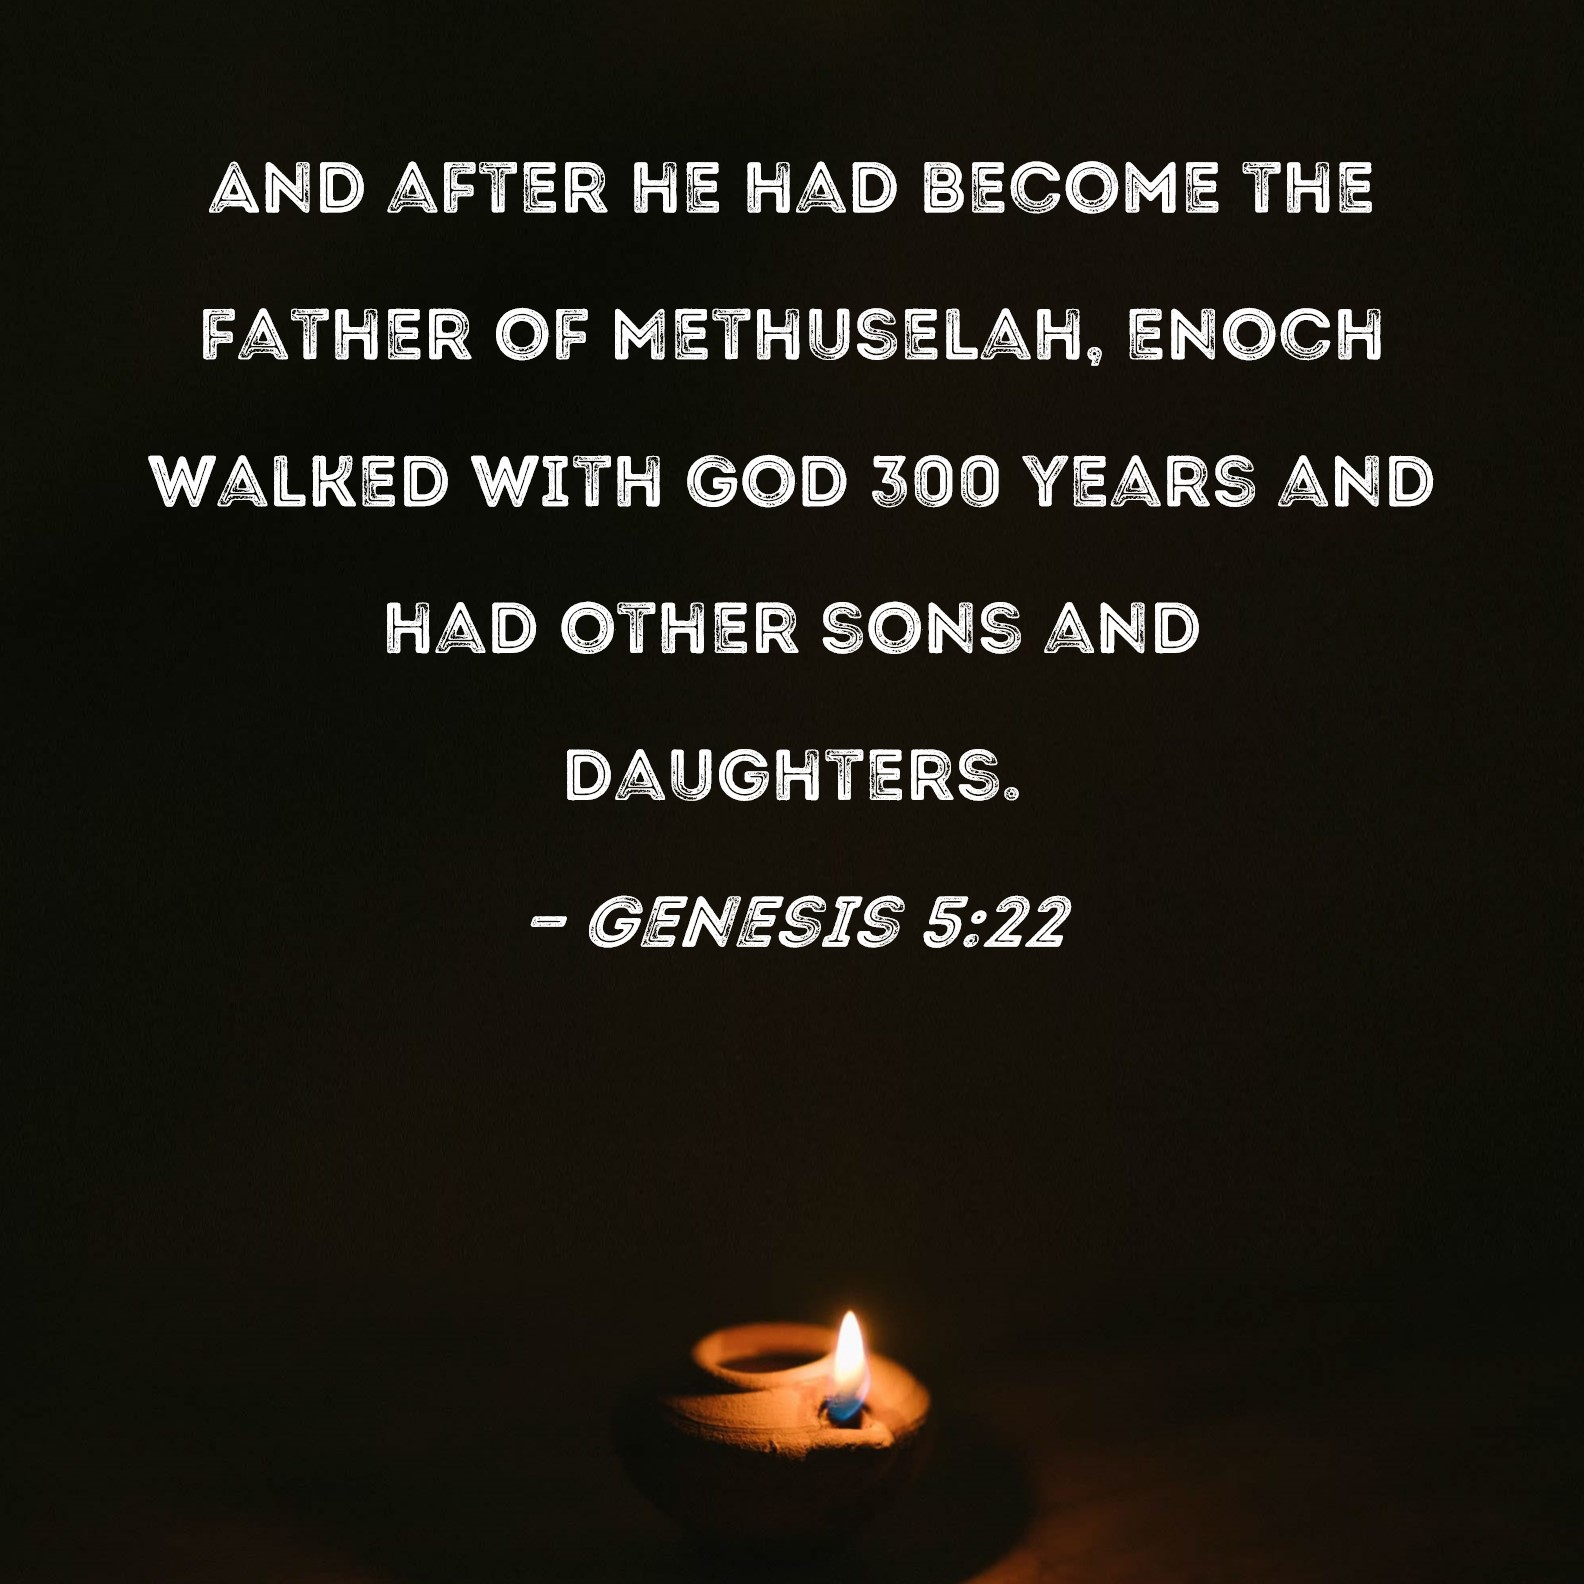 Genesis 5:22 And after he had become the father of Methuselah Enoch